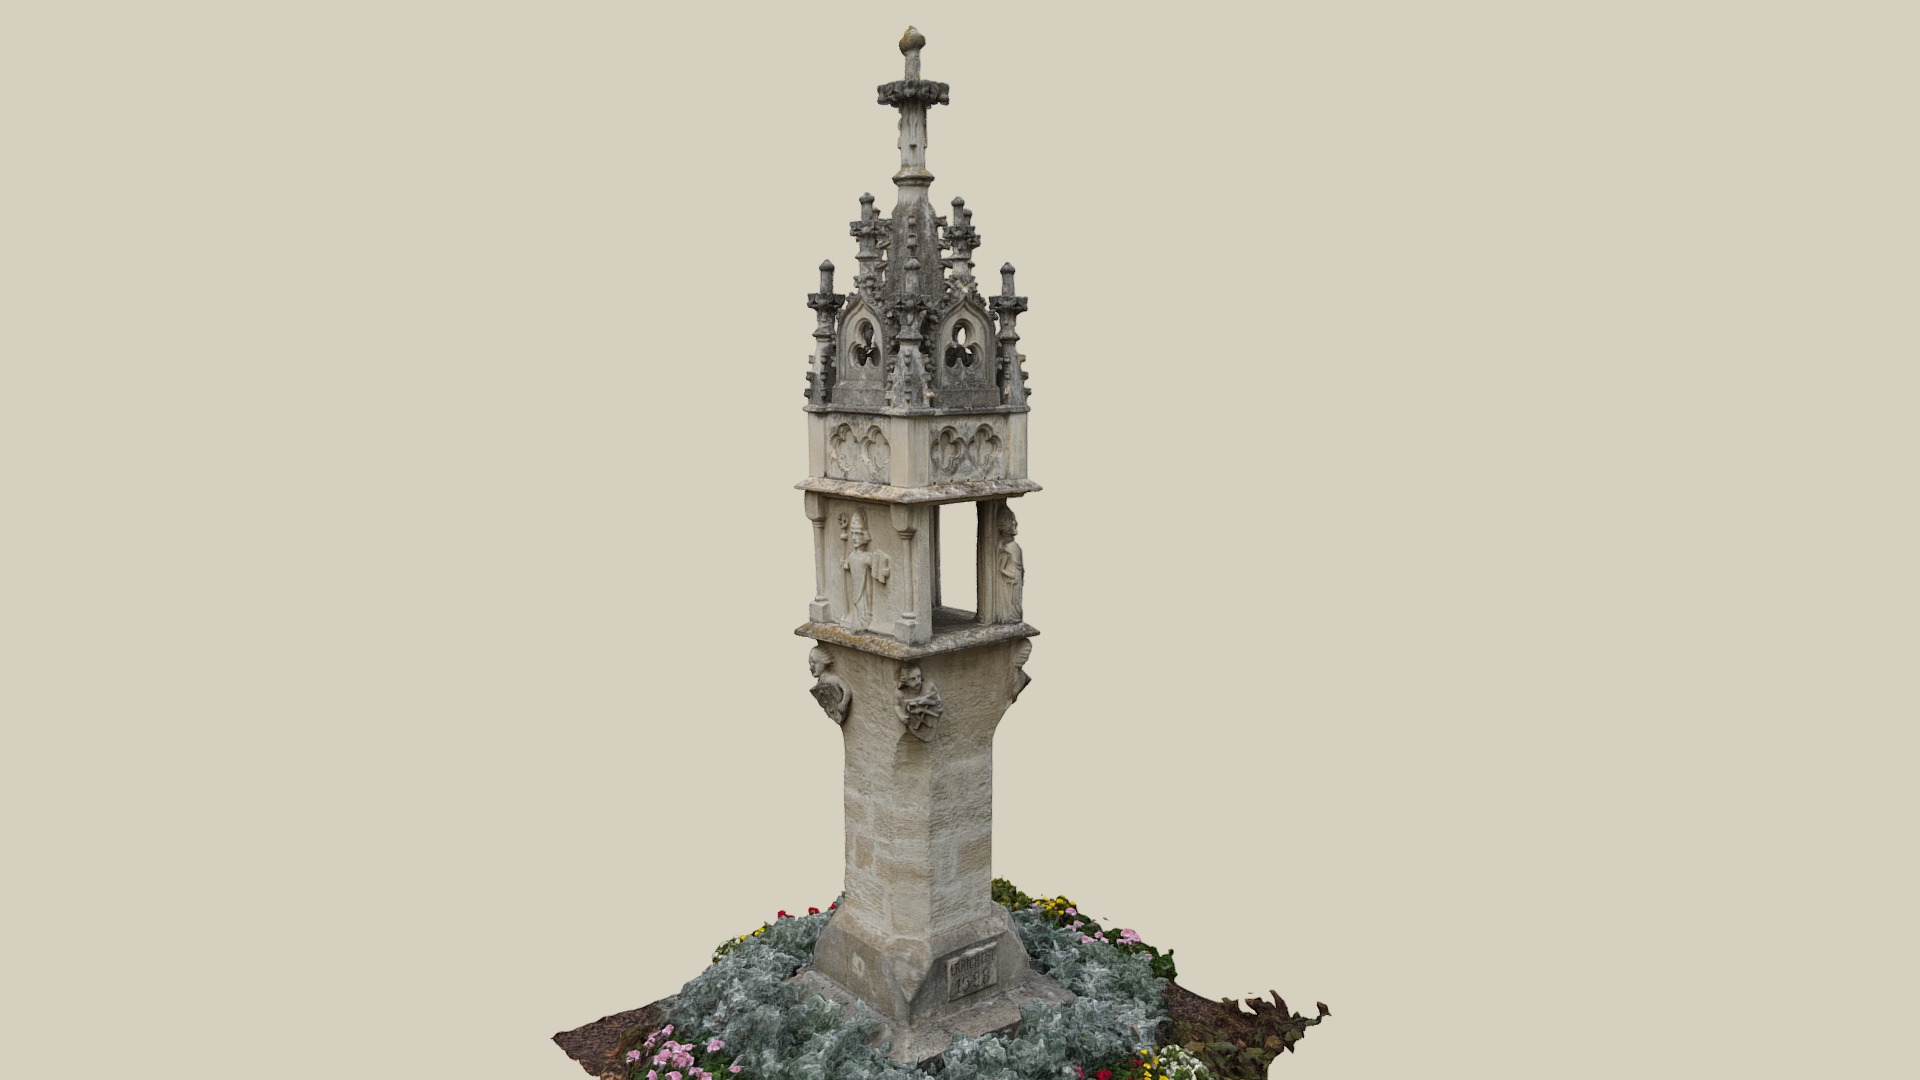 3D model Pestsäule - This is a 3D model of the Pestsäule. The 3D model is about a tall tower with a cross on top.